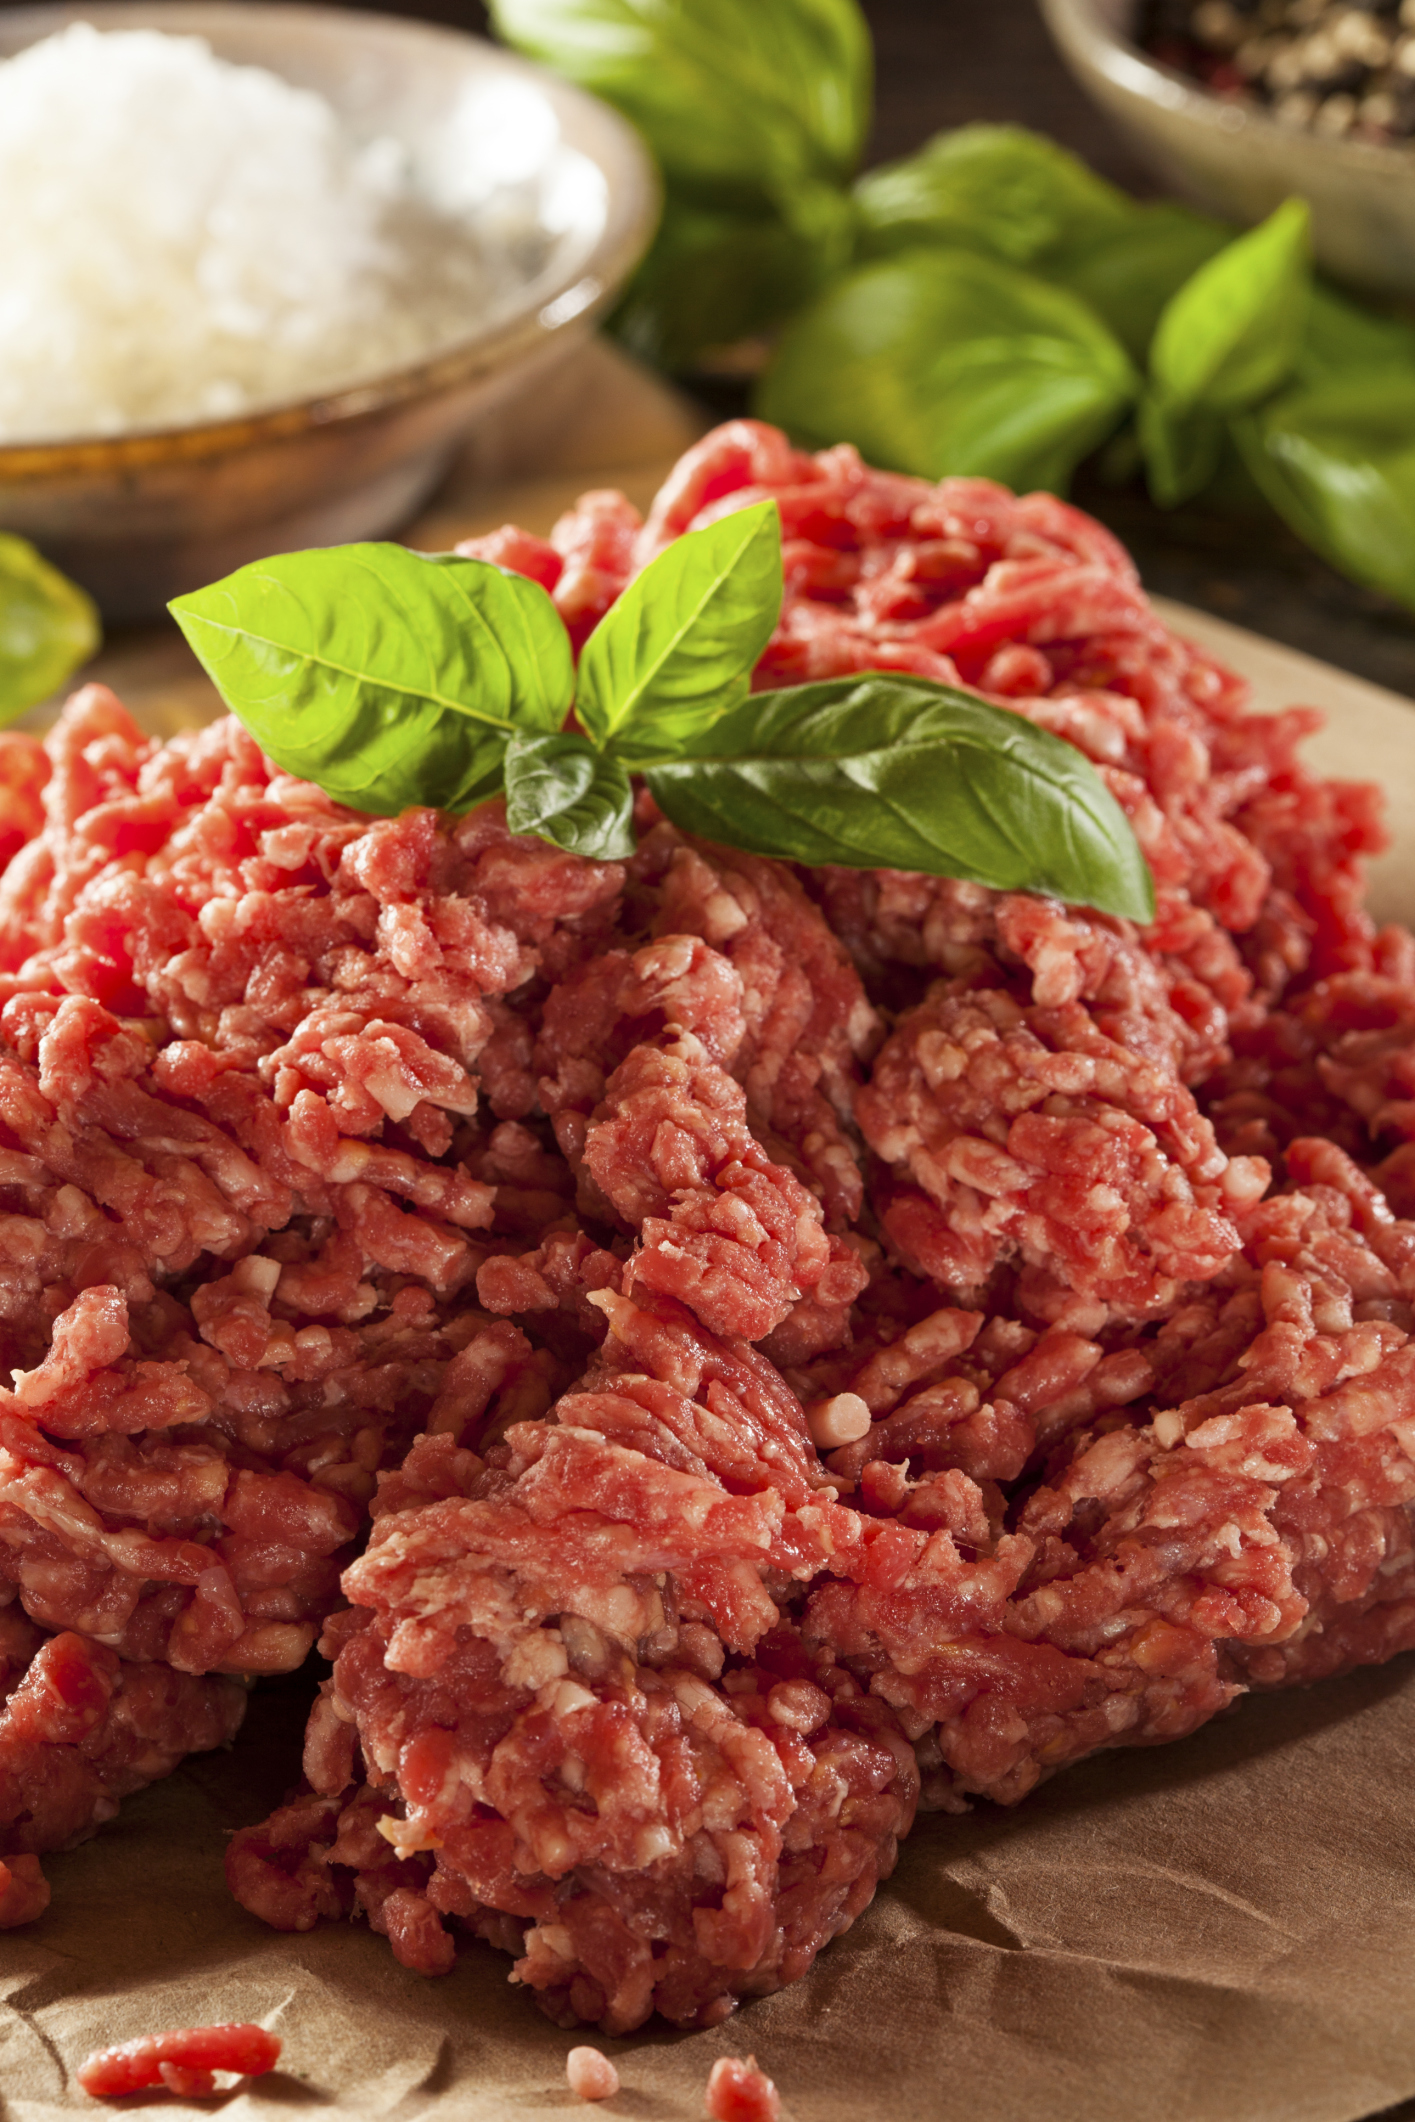 The Fatty Difference Between Ground Beef And Hamburger Meat